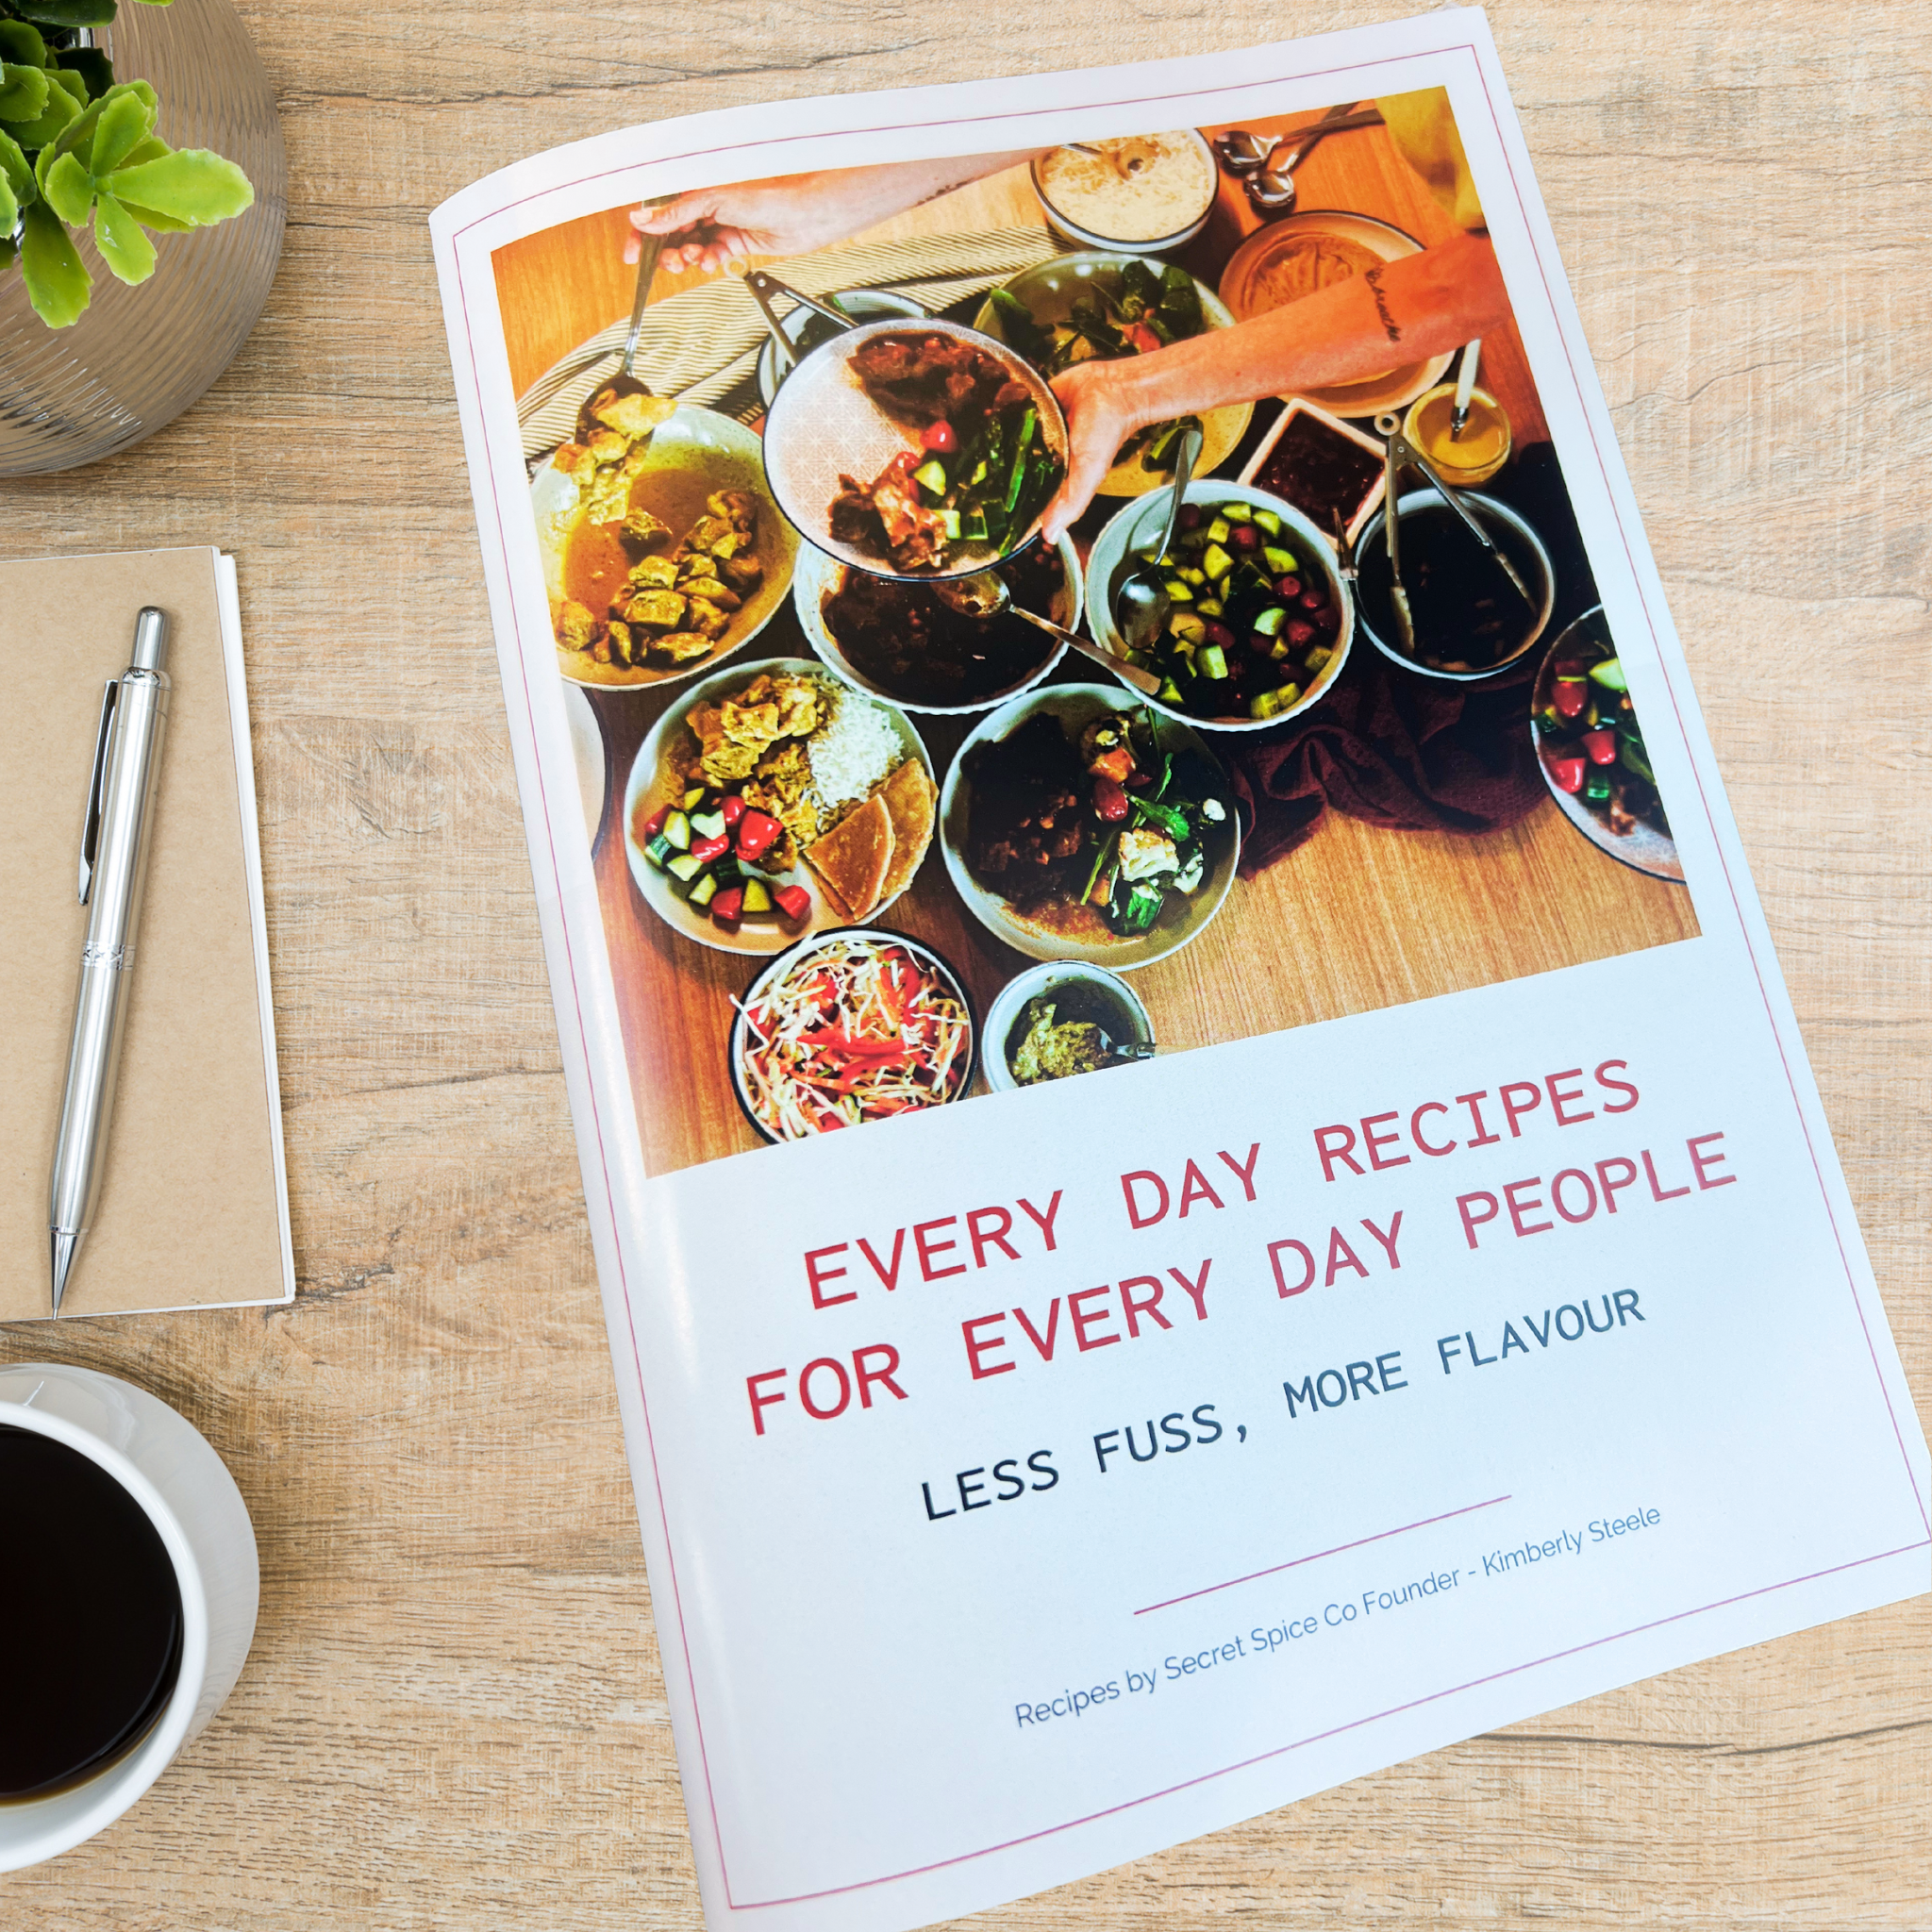 Every Day Recipes for Every Day People